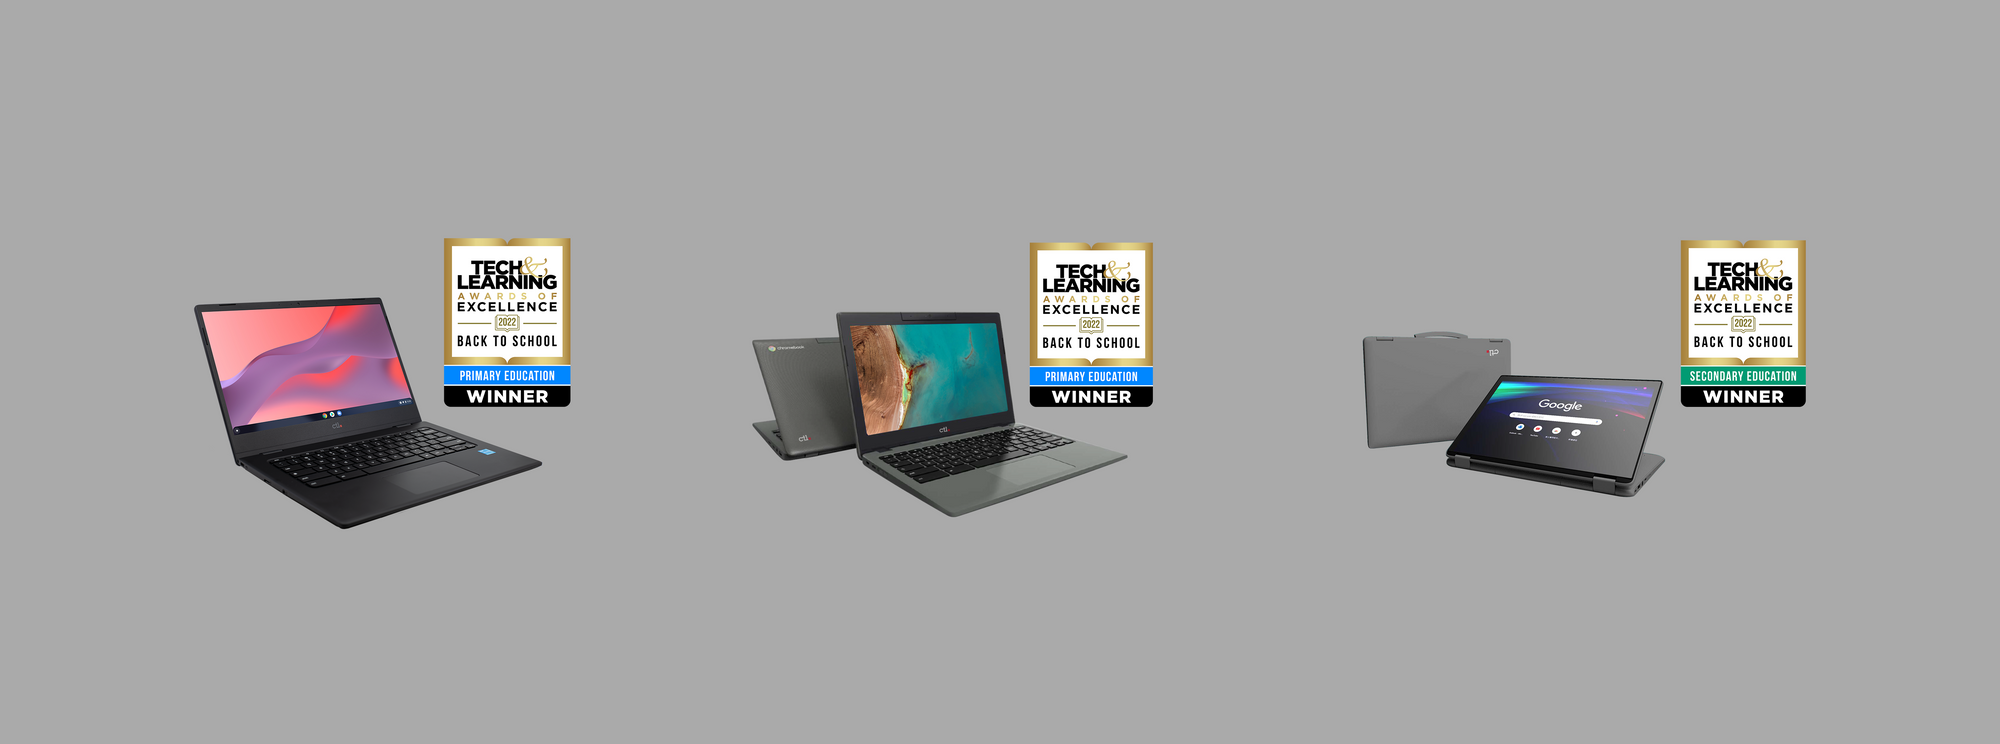 Three CTL Chromebooks win Awards of Excellence: Back to School 2022 from Tech & Learning Magazine